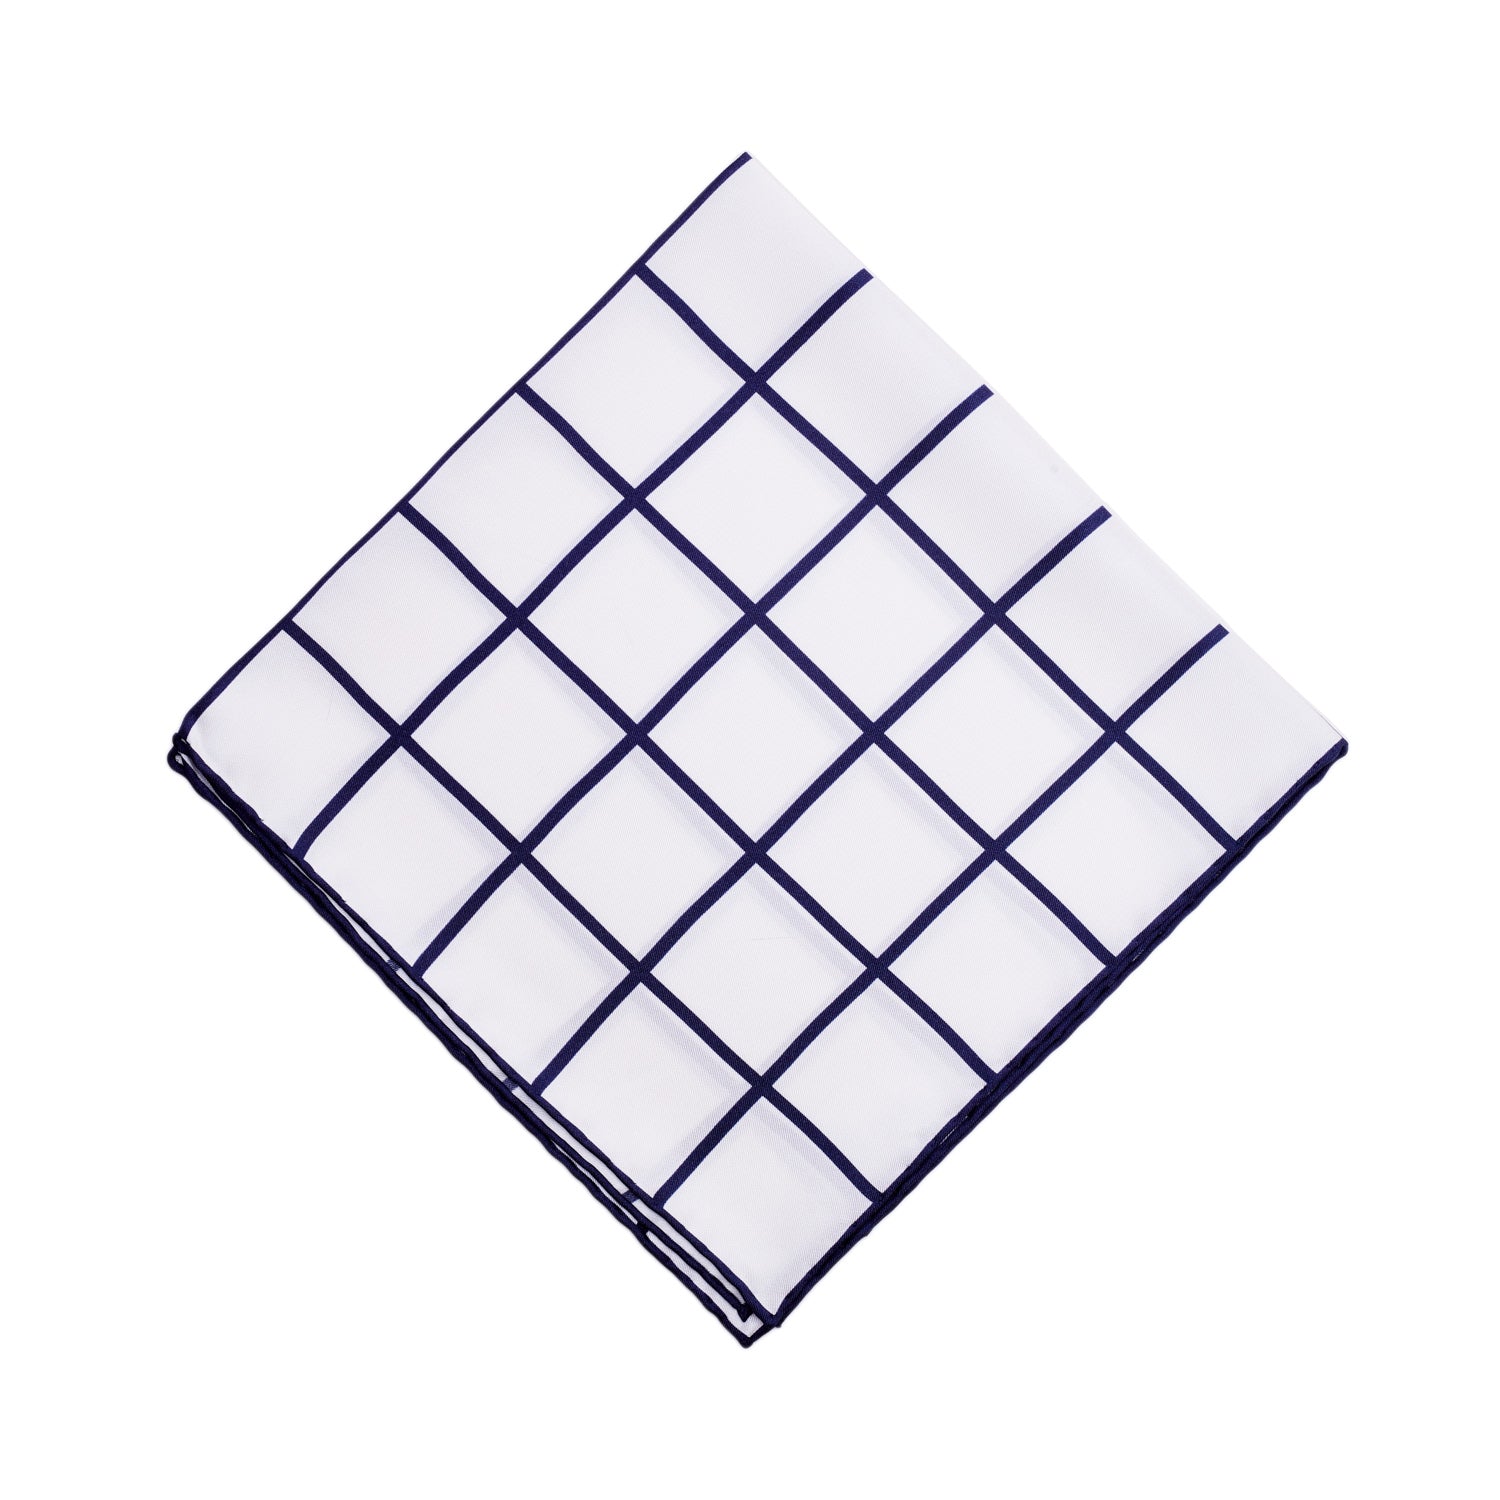 Sovereign Grade Prince of Wales Pocket Square, White/Navy